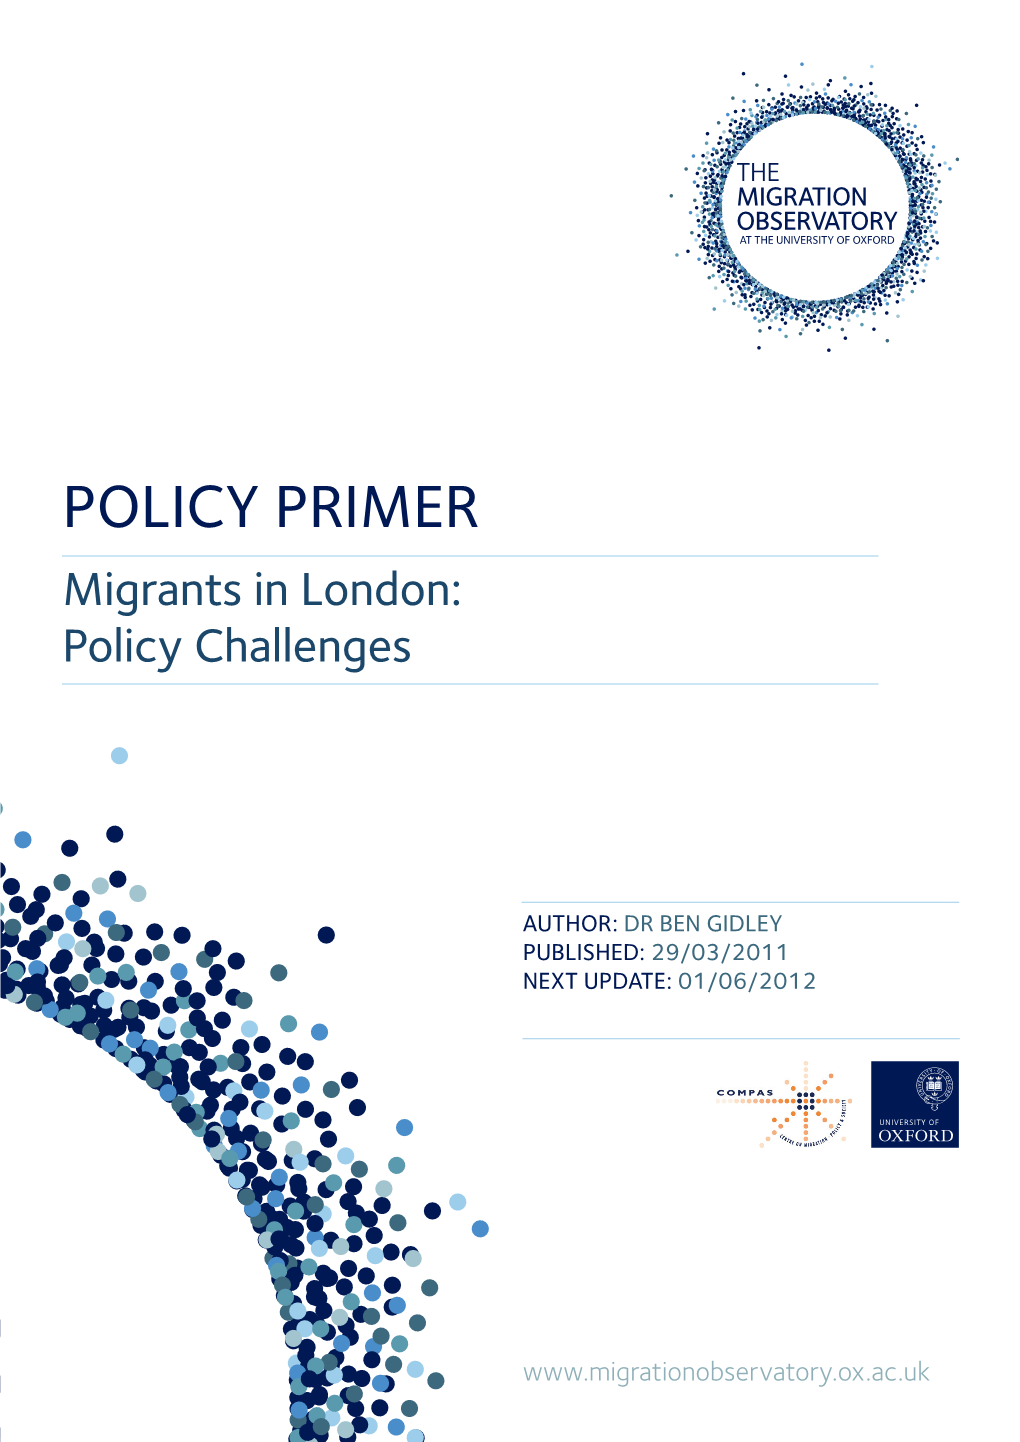 POLICY PRIMER Migrants in London: Policy Challenges